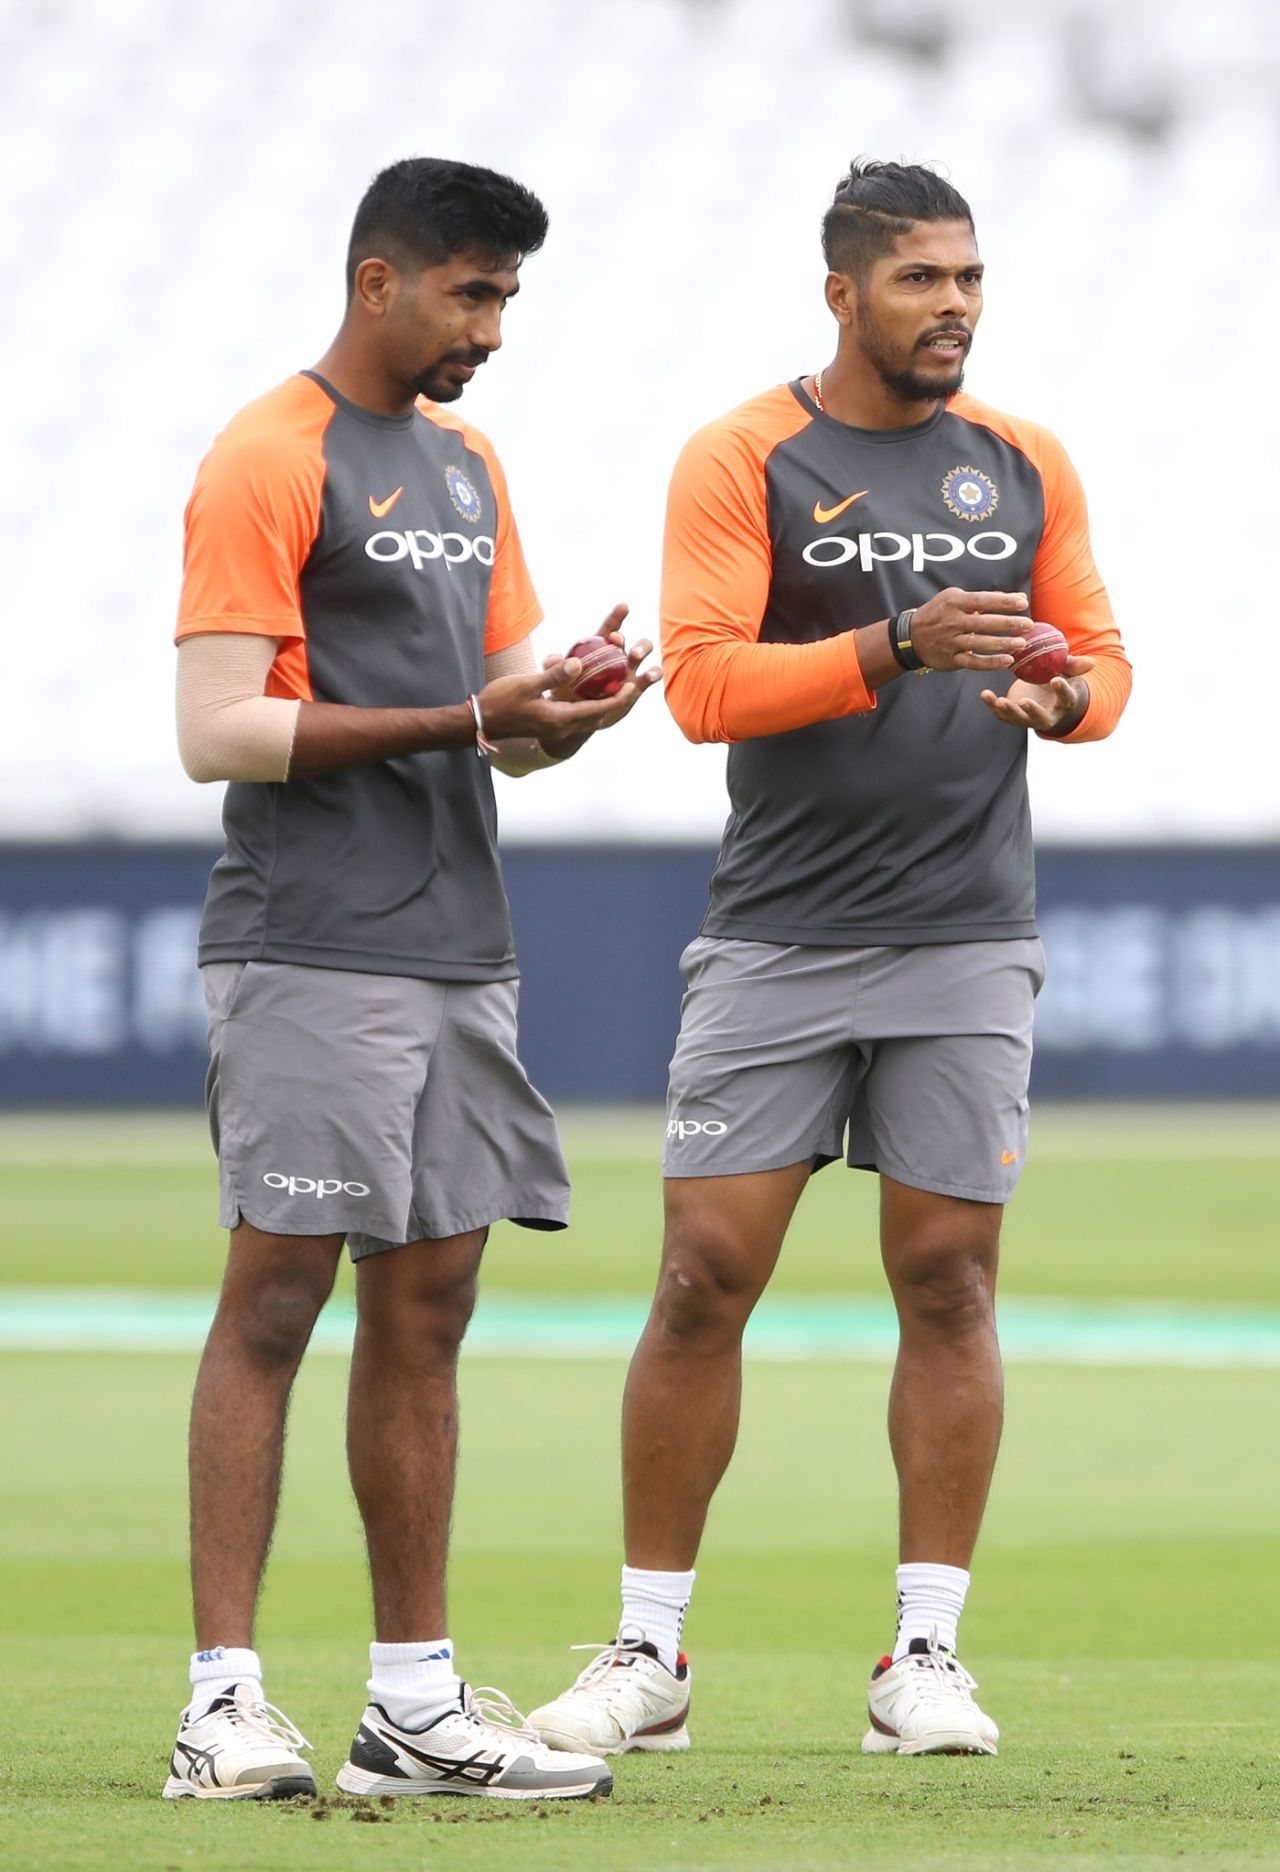 Jasprit Bumrah and Umesh Yadav prepare to bowl during a nets session, England v India, 3rd Test, Trent Bridge, August 17, 2018